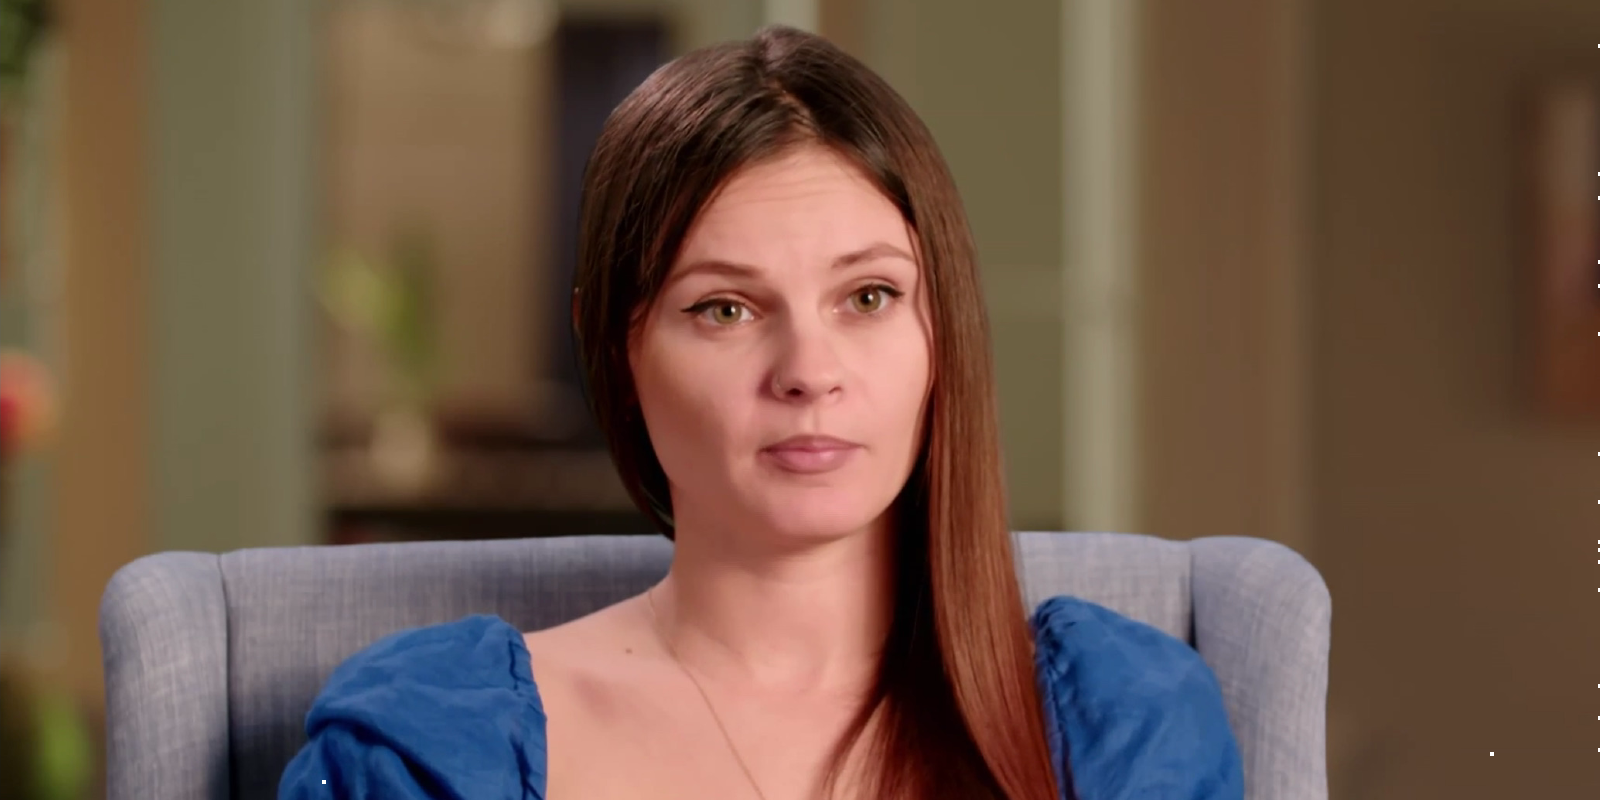 90 Day Fiancé: Happily Ever After star Julia Trubkina